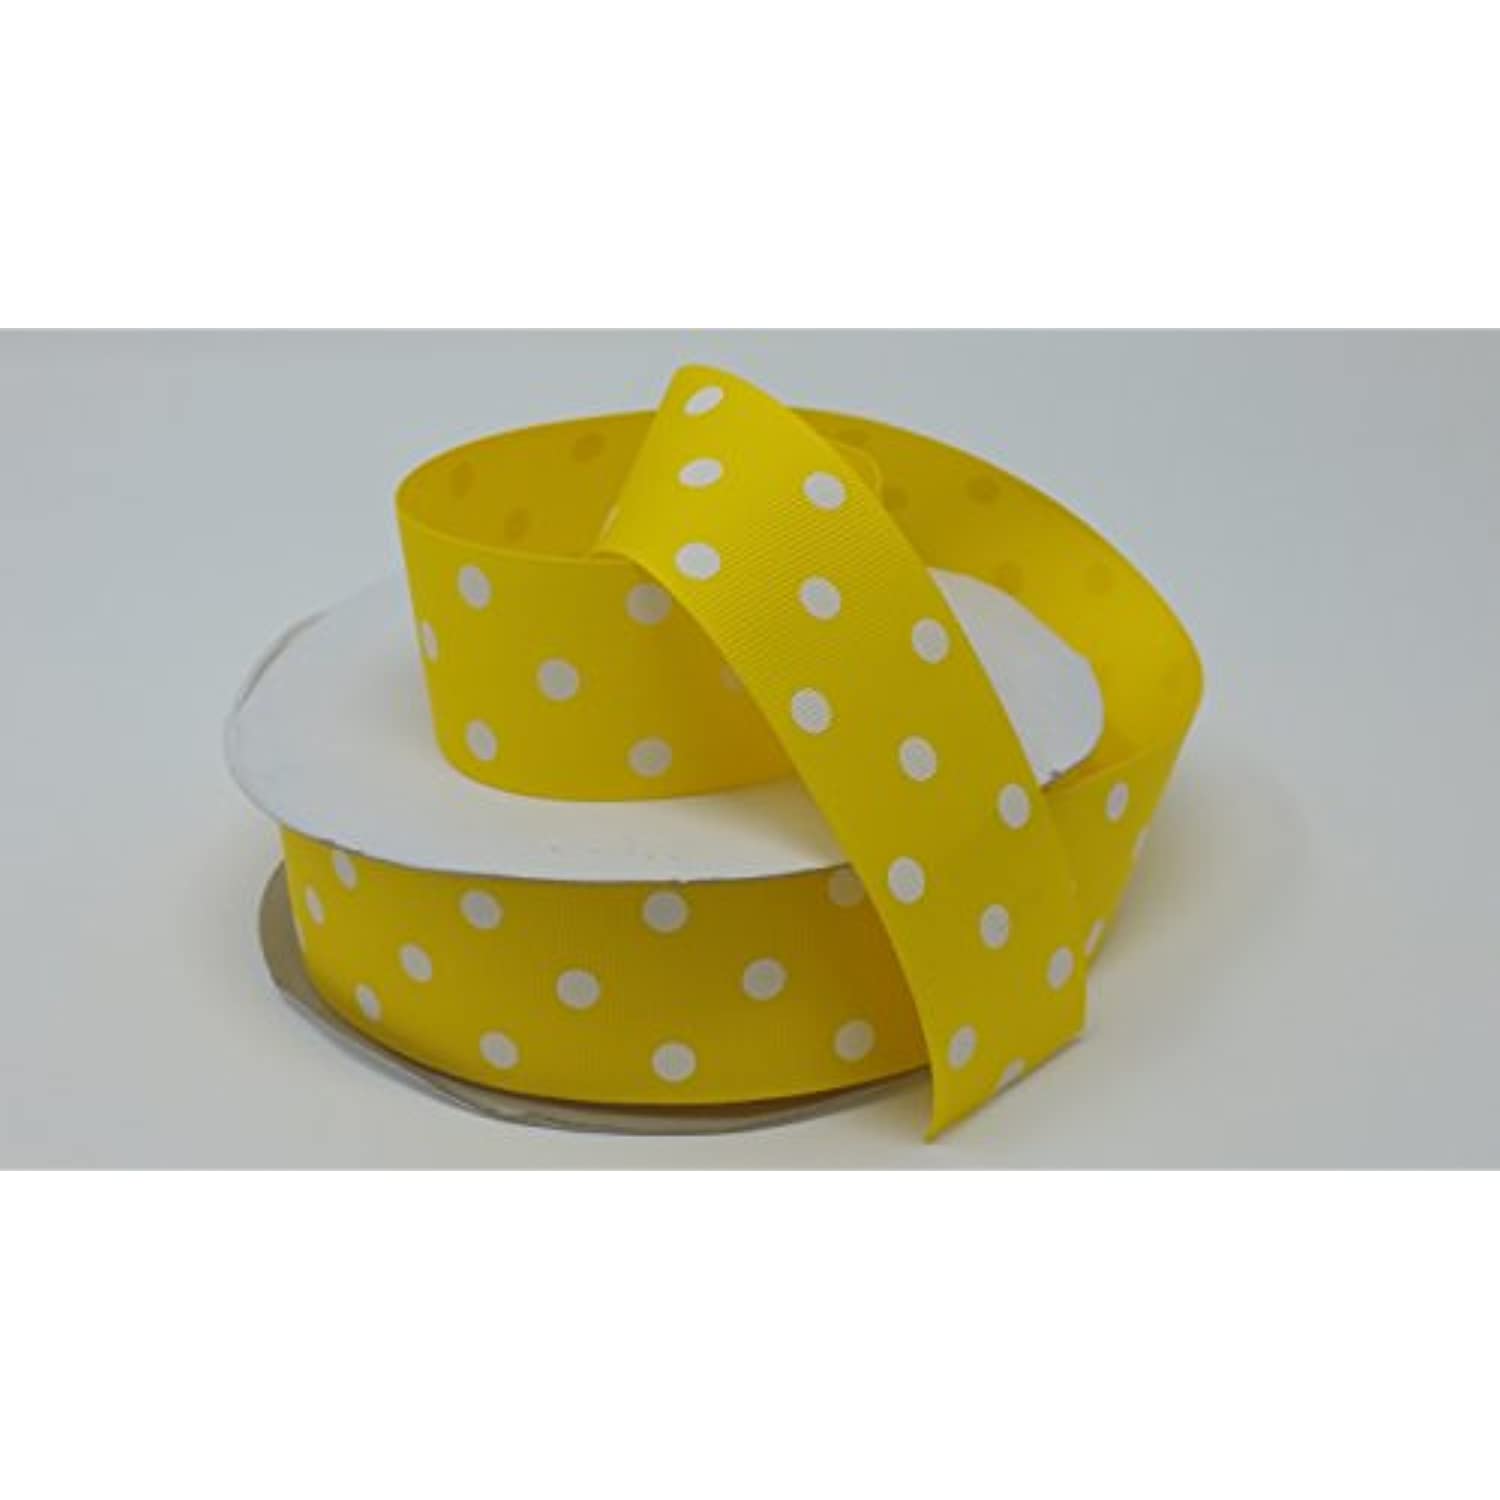 Polyester Grosgrain Ribbon for Decorations, Hairbows & Gift Wrap by Yame Home (1 1/2-in by 10-yds, 00025292 - White Polka Dot w/yellow background)